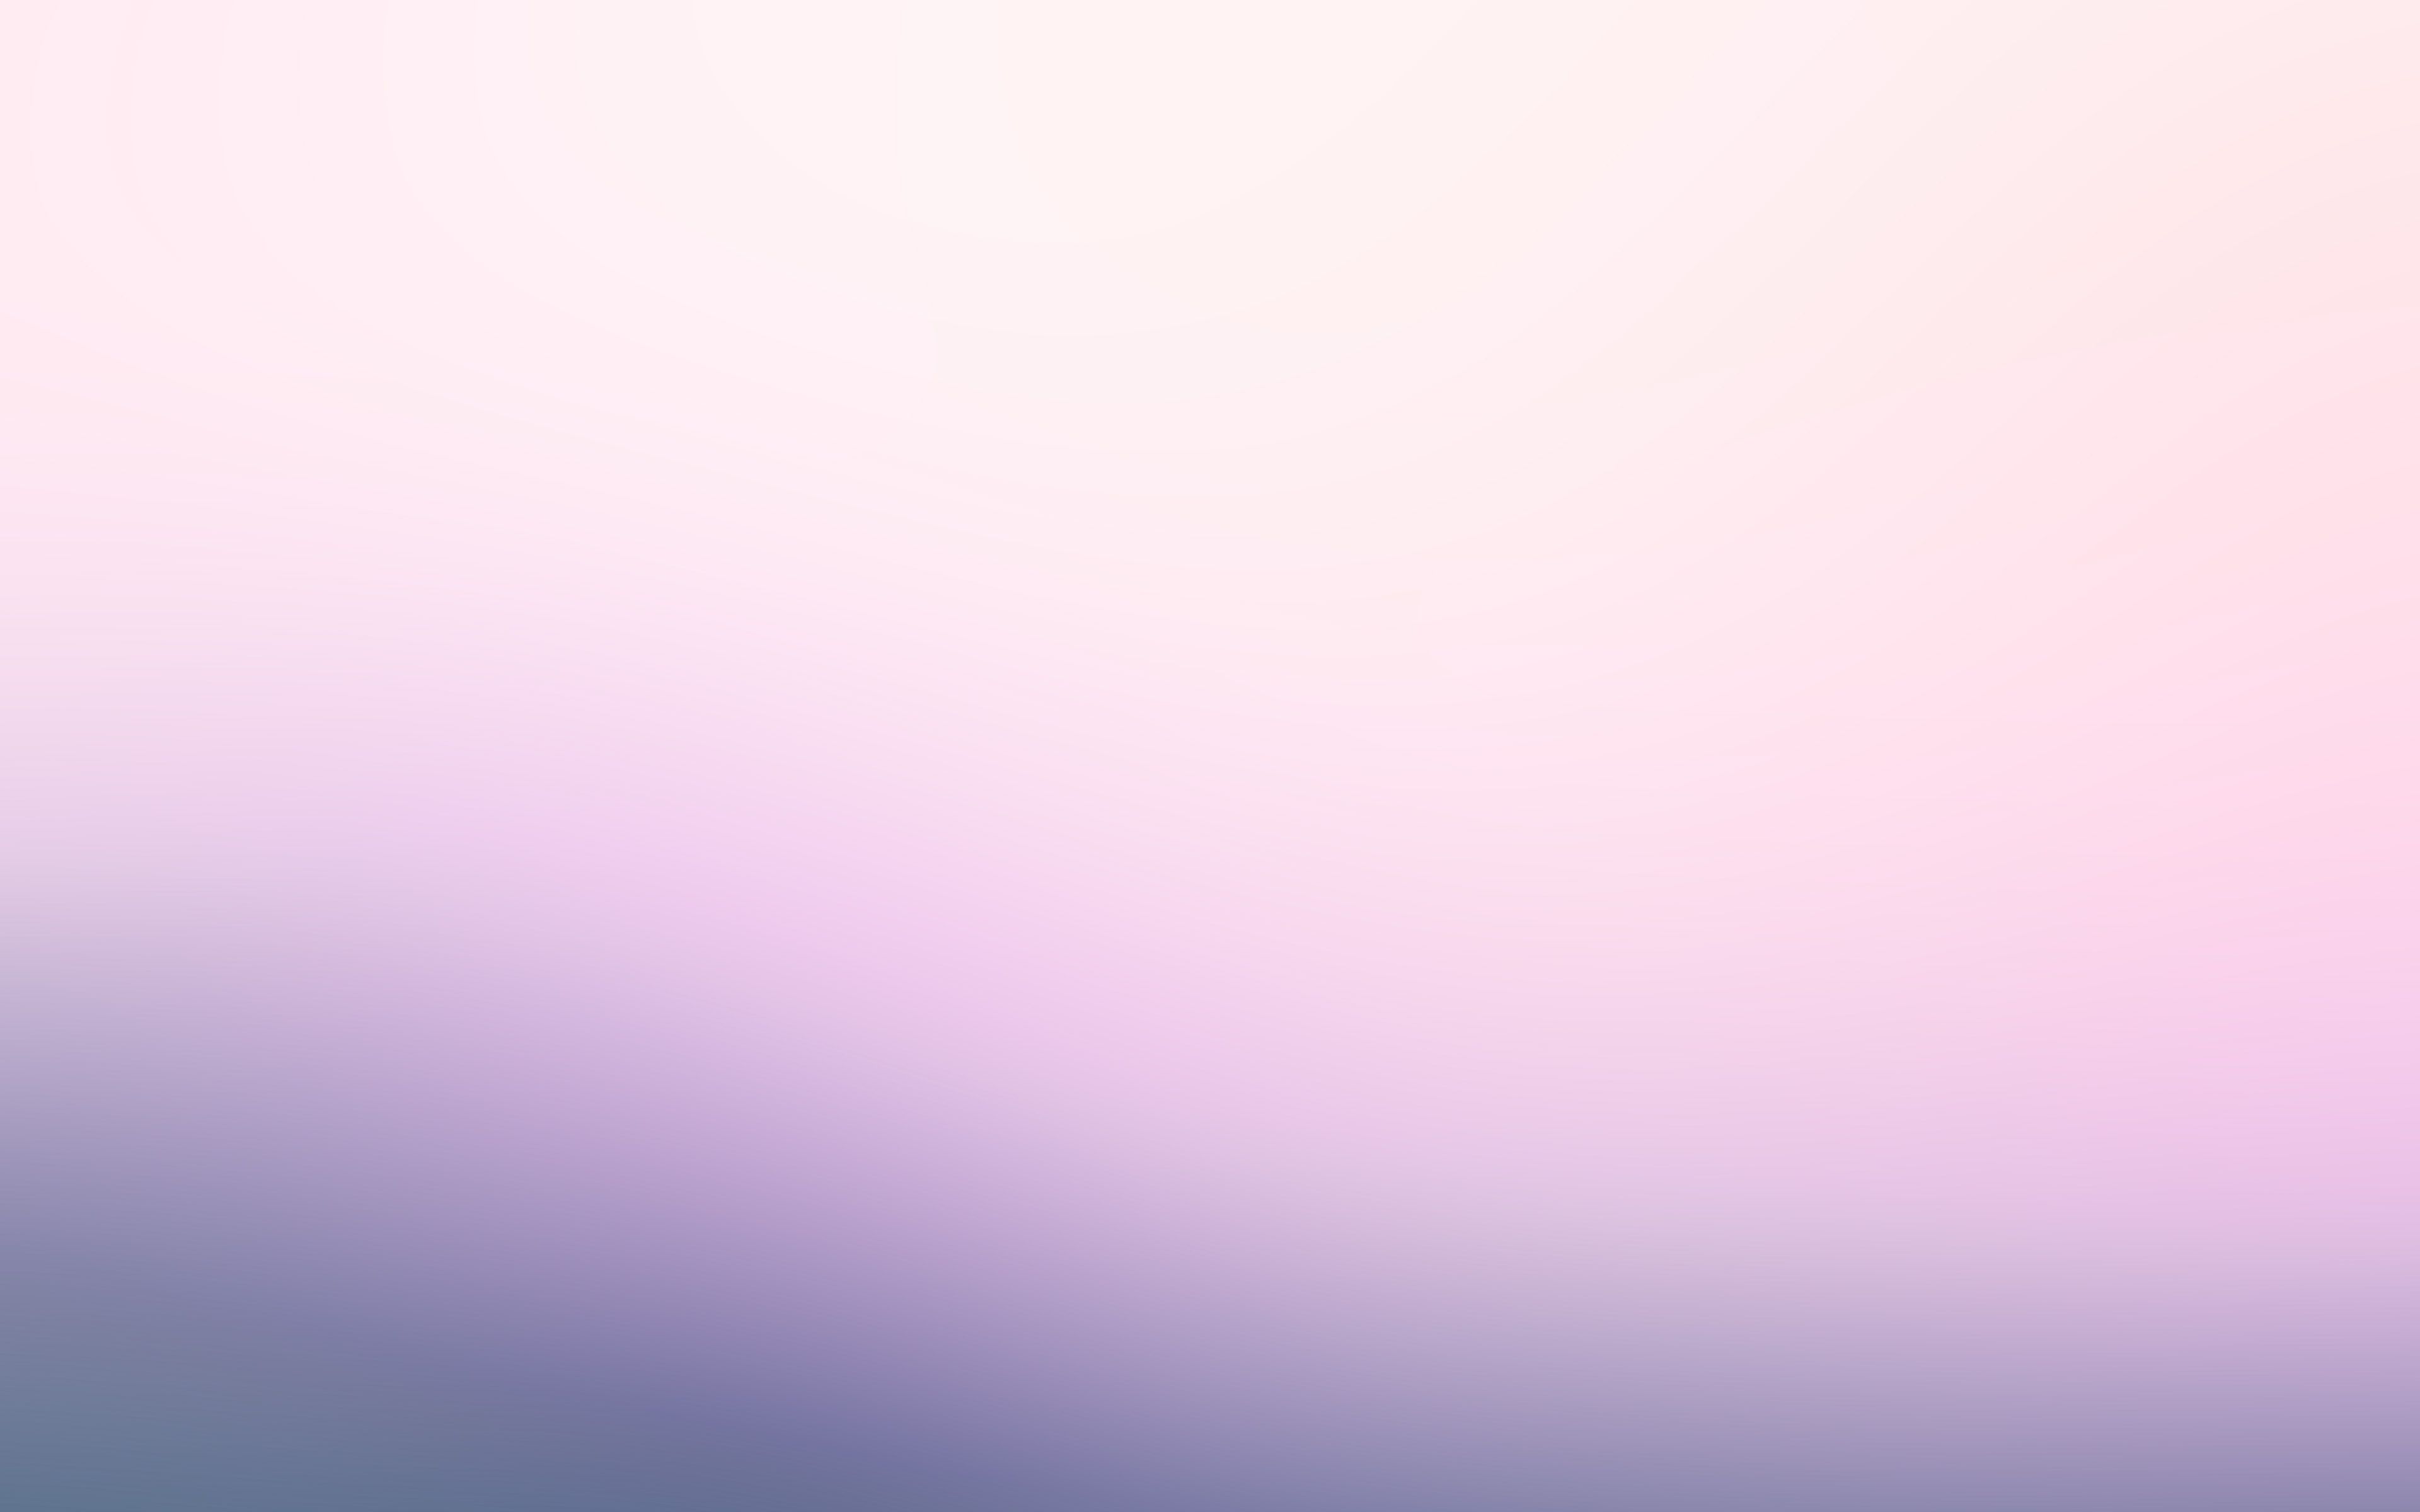 A purple and blue blurry background - Calming